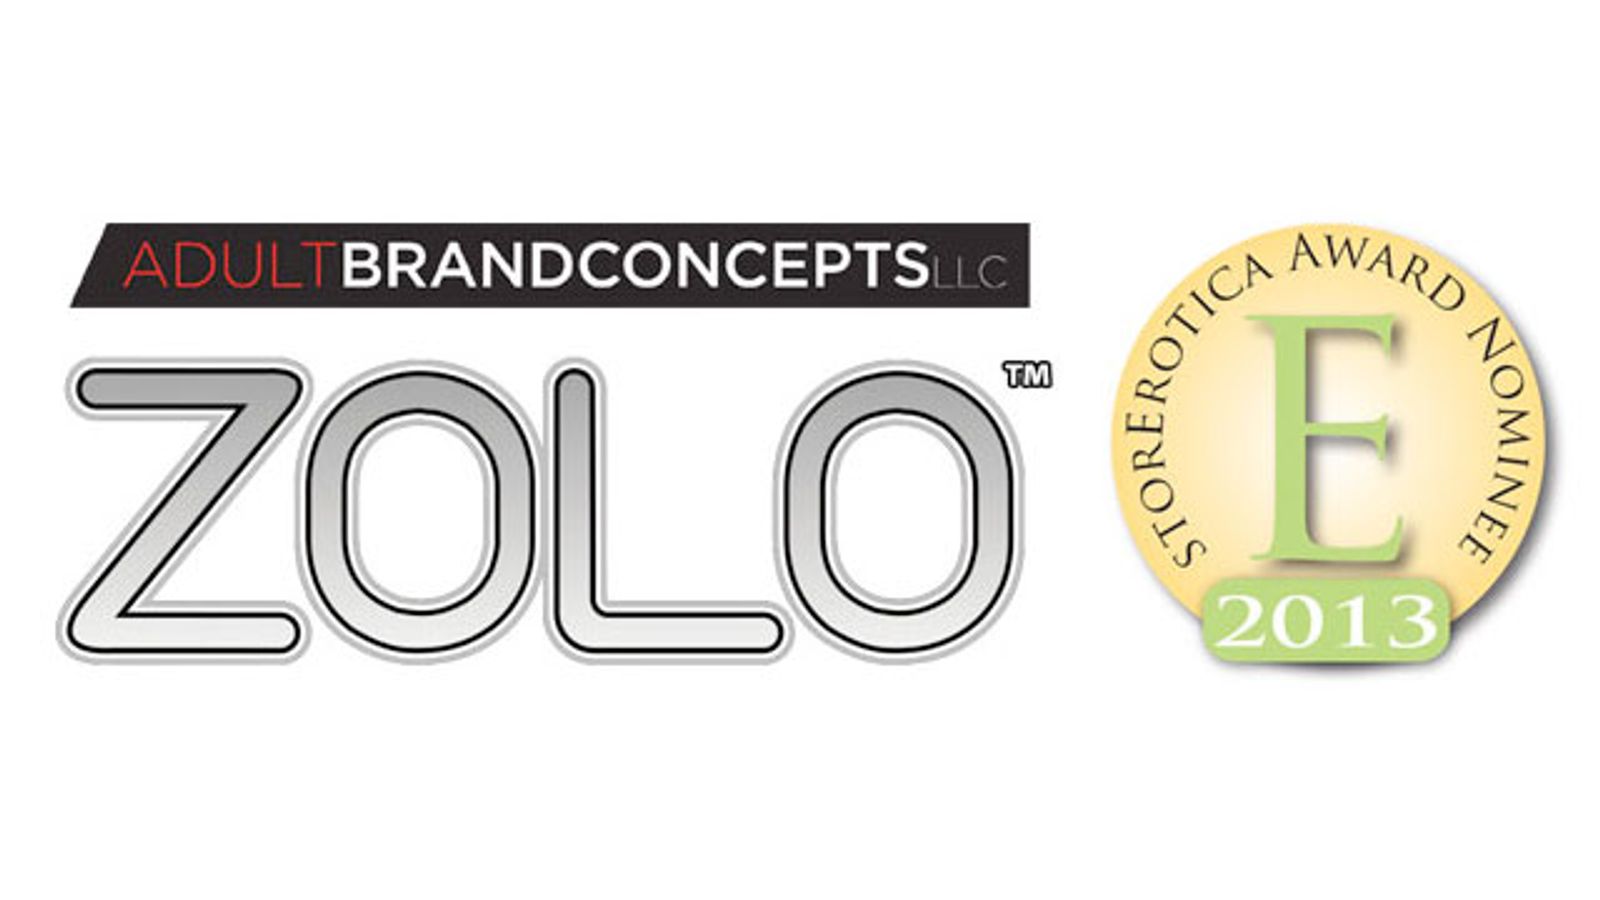 Adult Brand Concepts’ Zolo Pleasure System Up for StorErotica Award